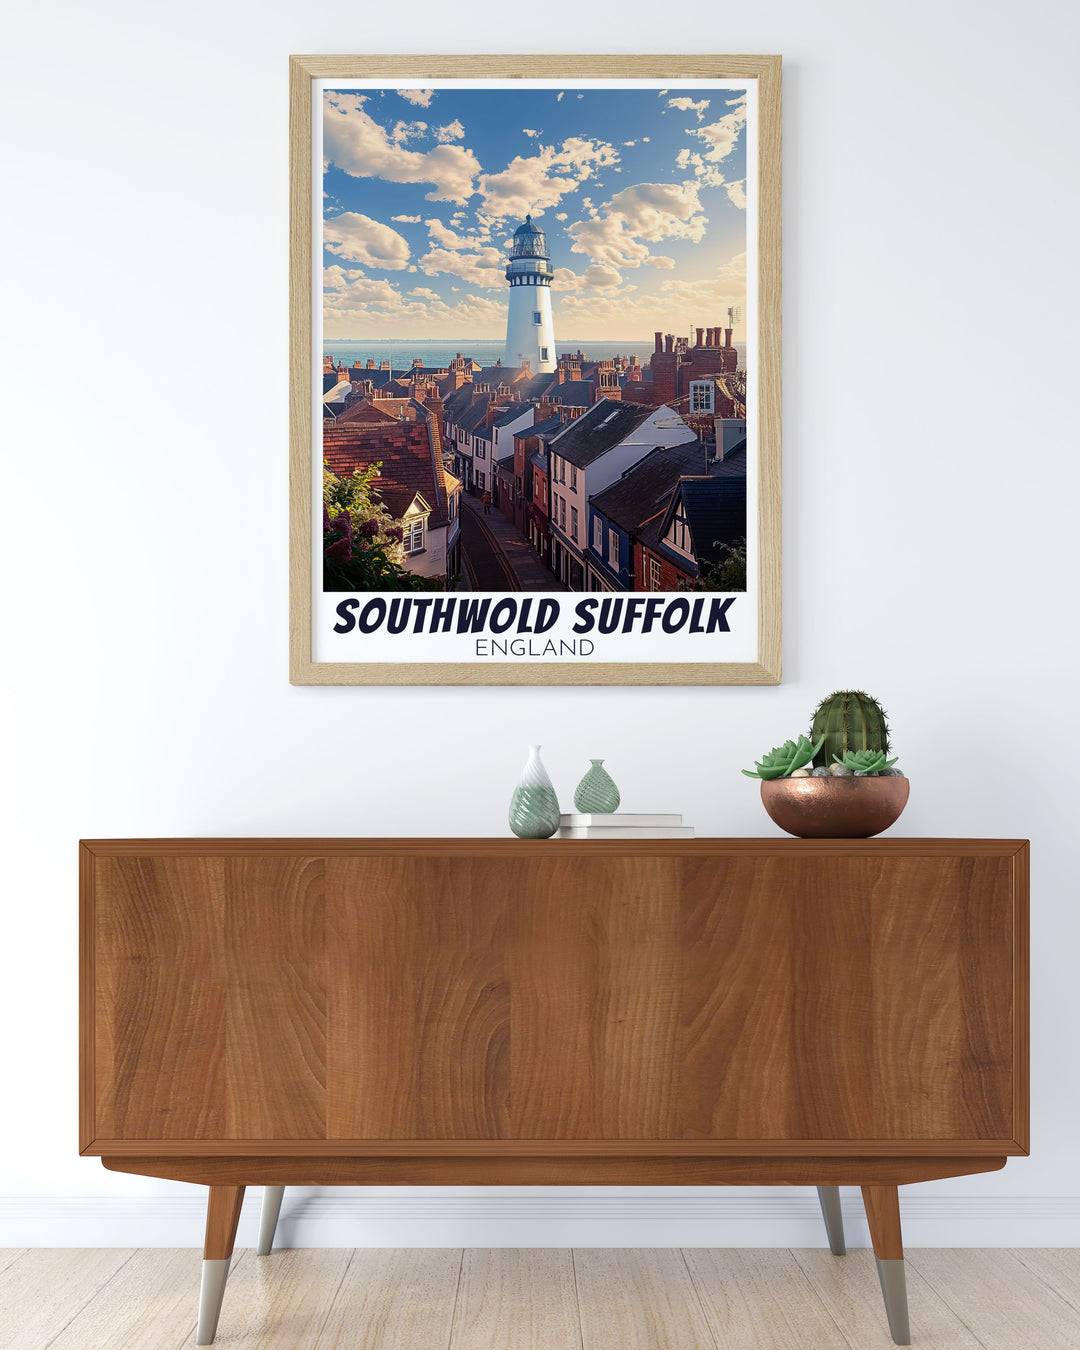 Retro Seaside Poster depicting the SouthwoldLighthouse and vibrant beach huts in Southwold a perfect choice for those who appreciate UK travel prints and coastal artwork ideal for adding a nostalgic touch to your home decor